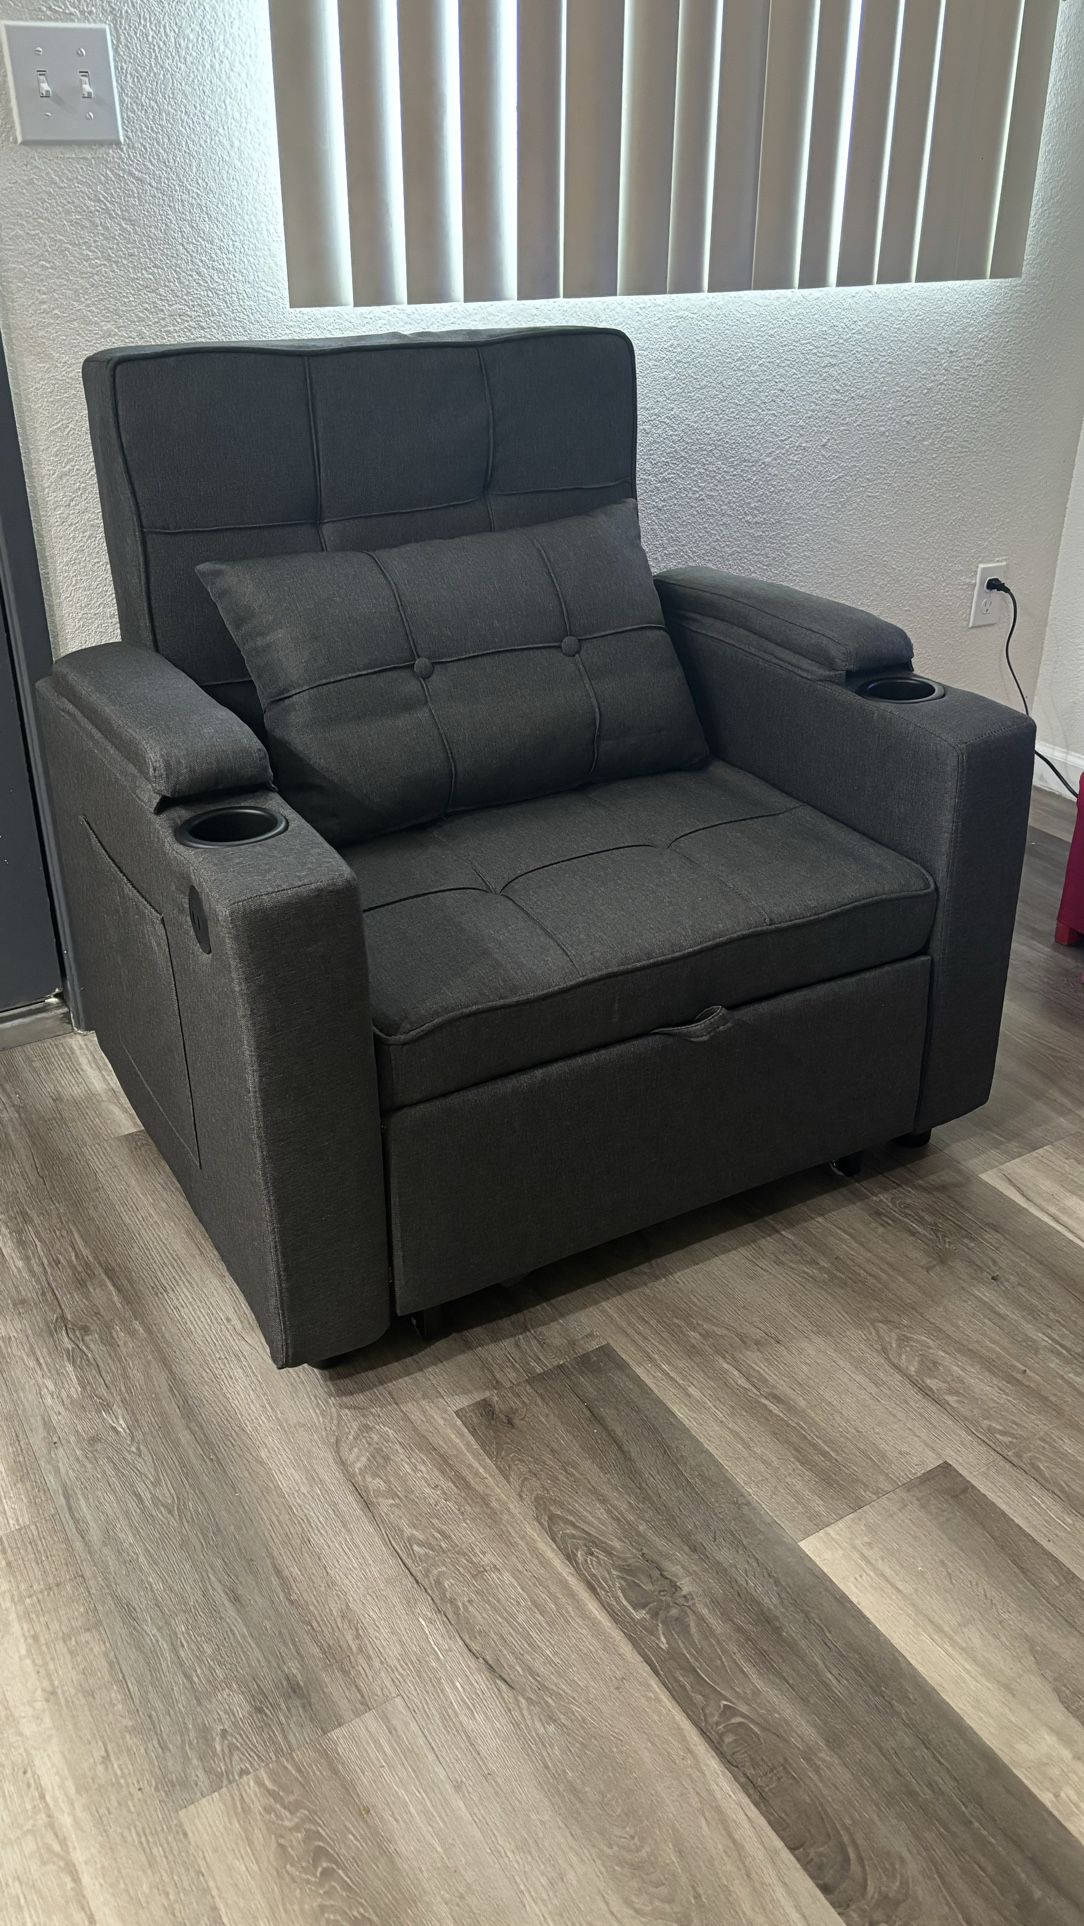 Recliner Chair With  Bed, Usb Plug And Storage